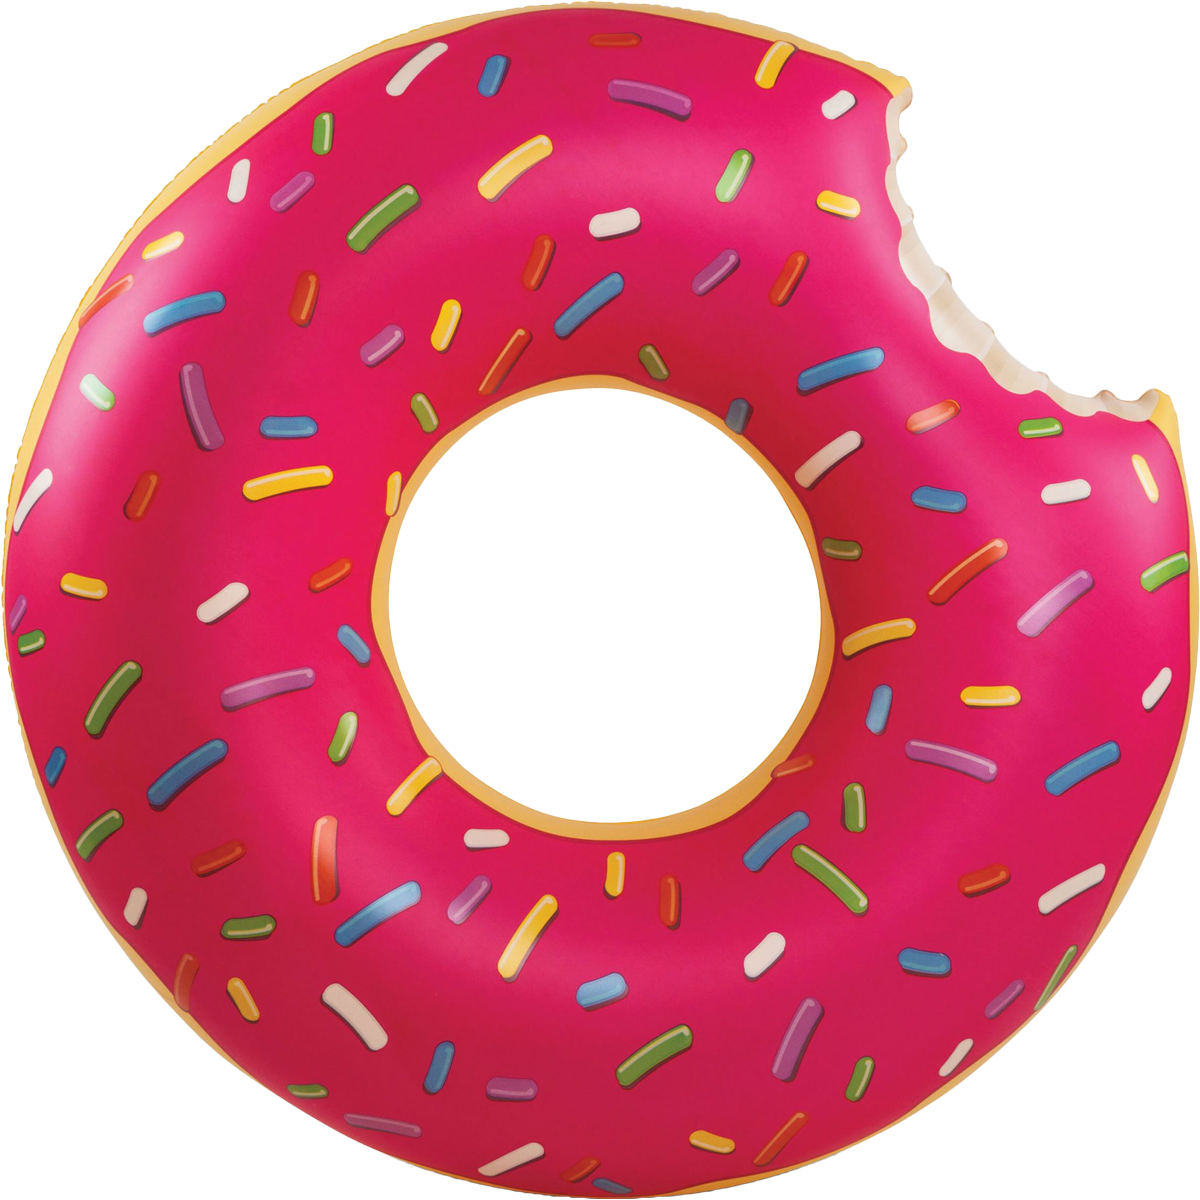 Giant Pink Frosted Donut Pool Float alternate view